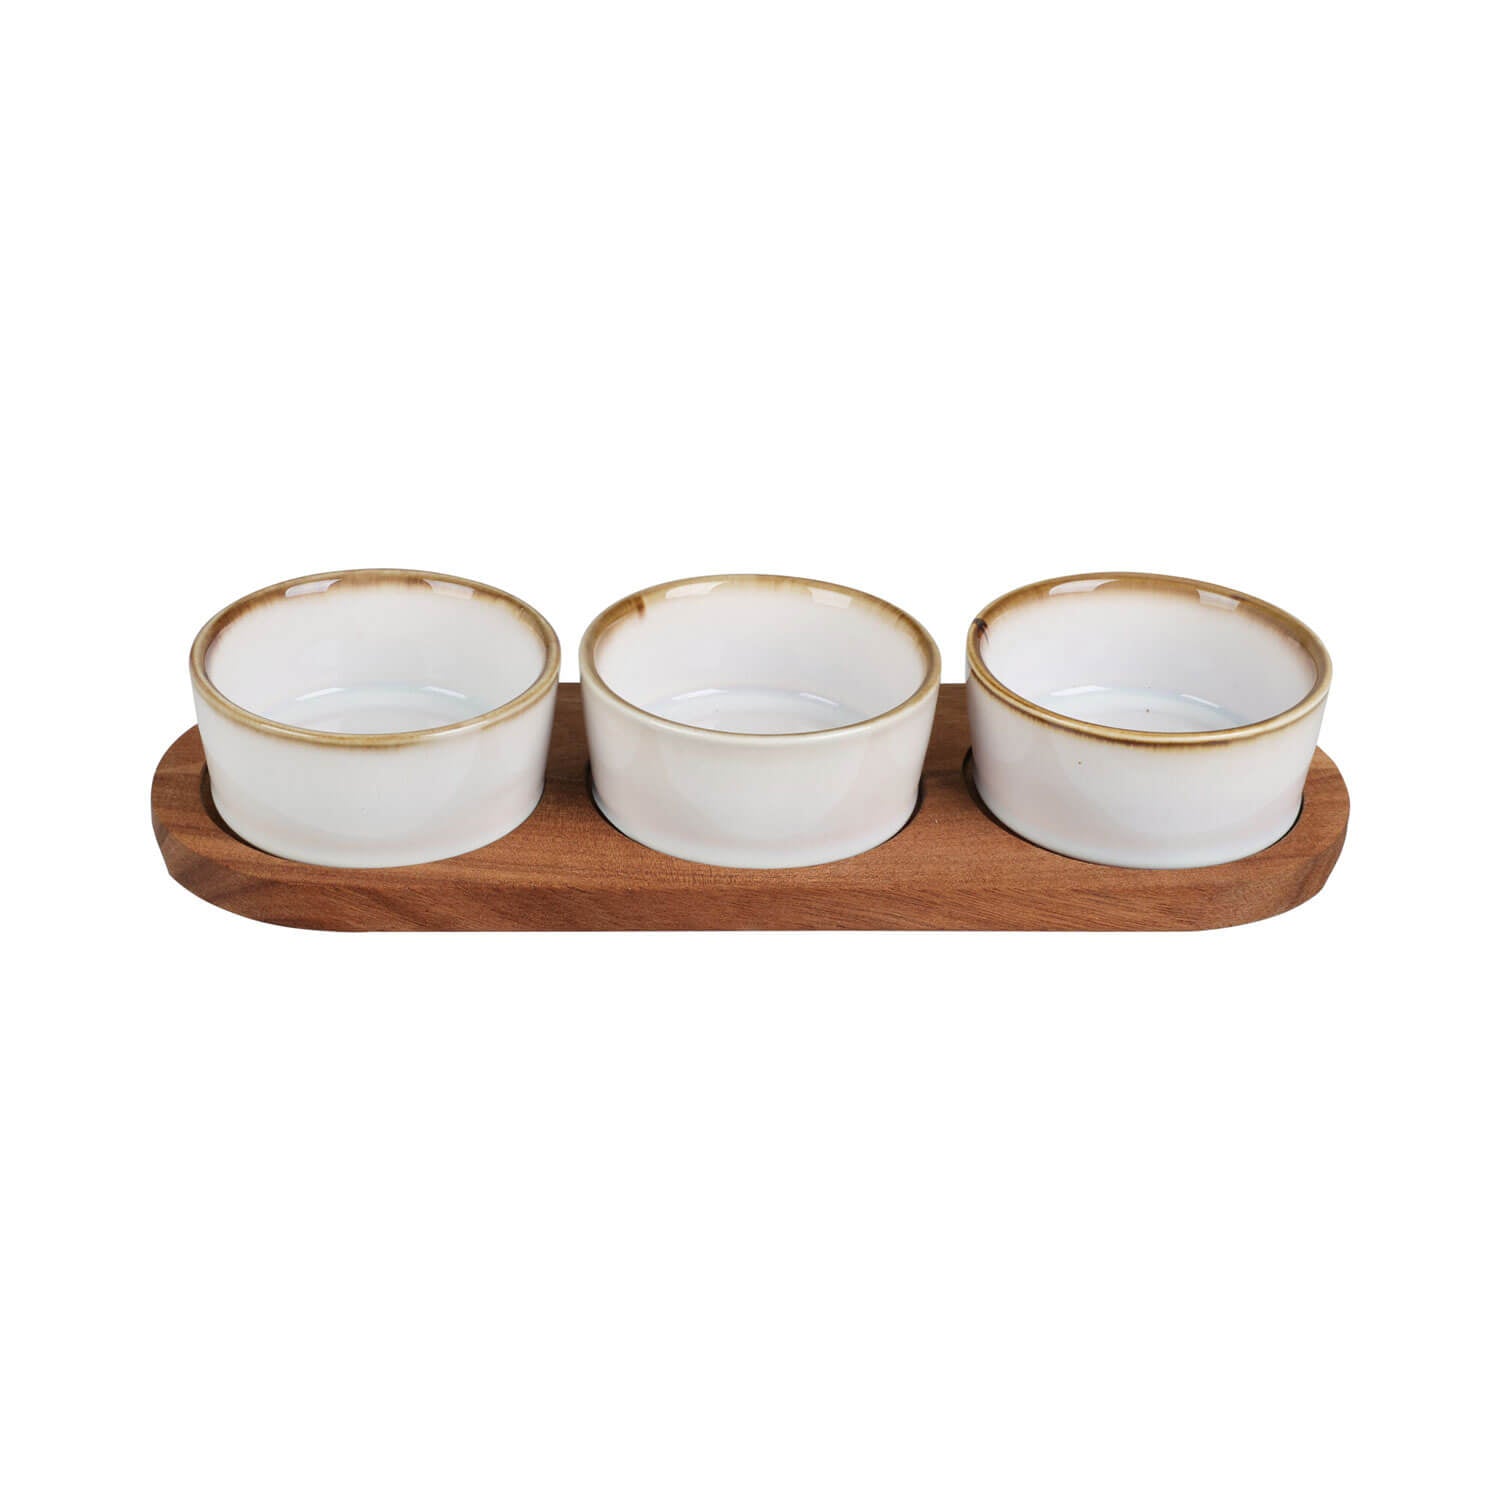 The Home Set of 3 Bowls on Serving Dish 1 Shaws Department Stores